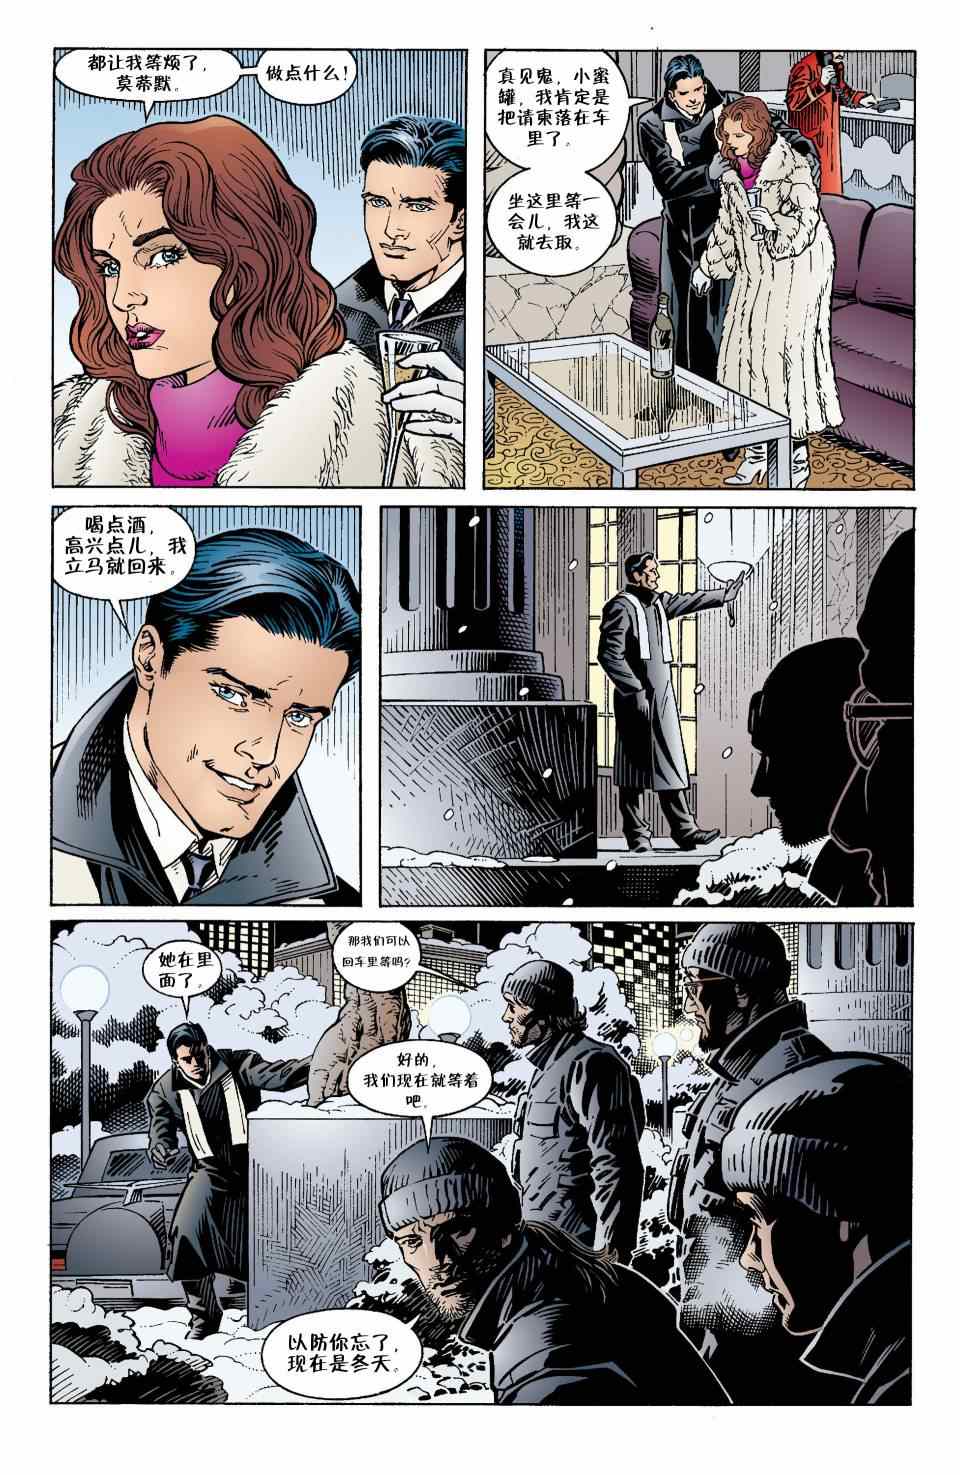 《Fables》漫画 012卷